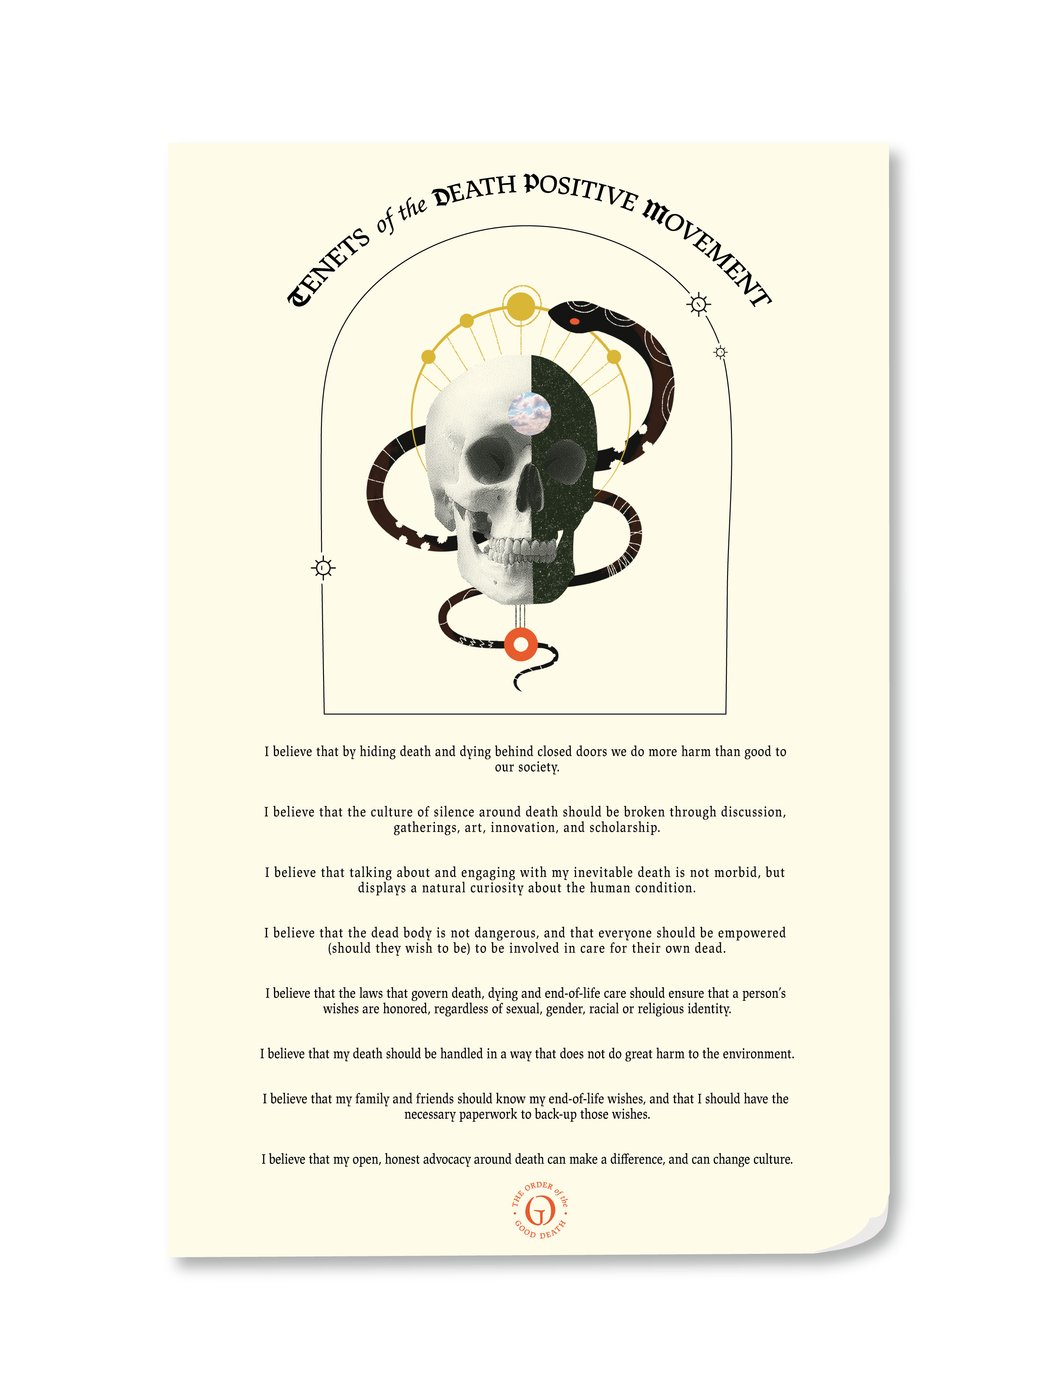 Tenets of the Death Positive Movement Poster